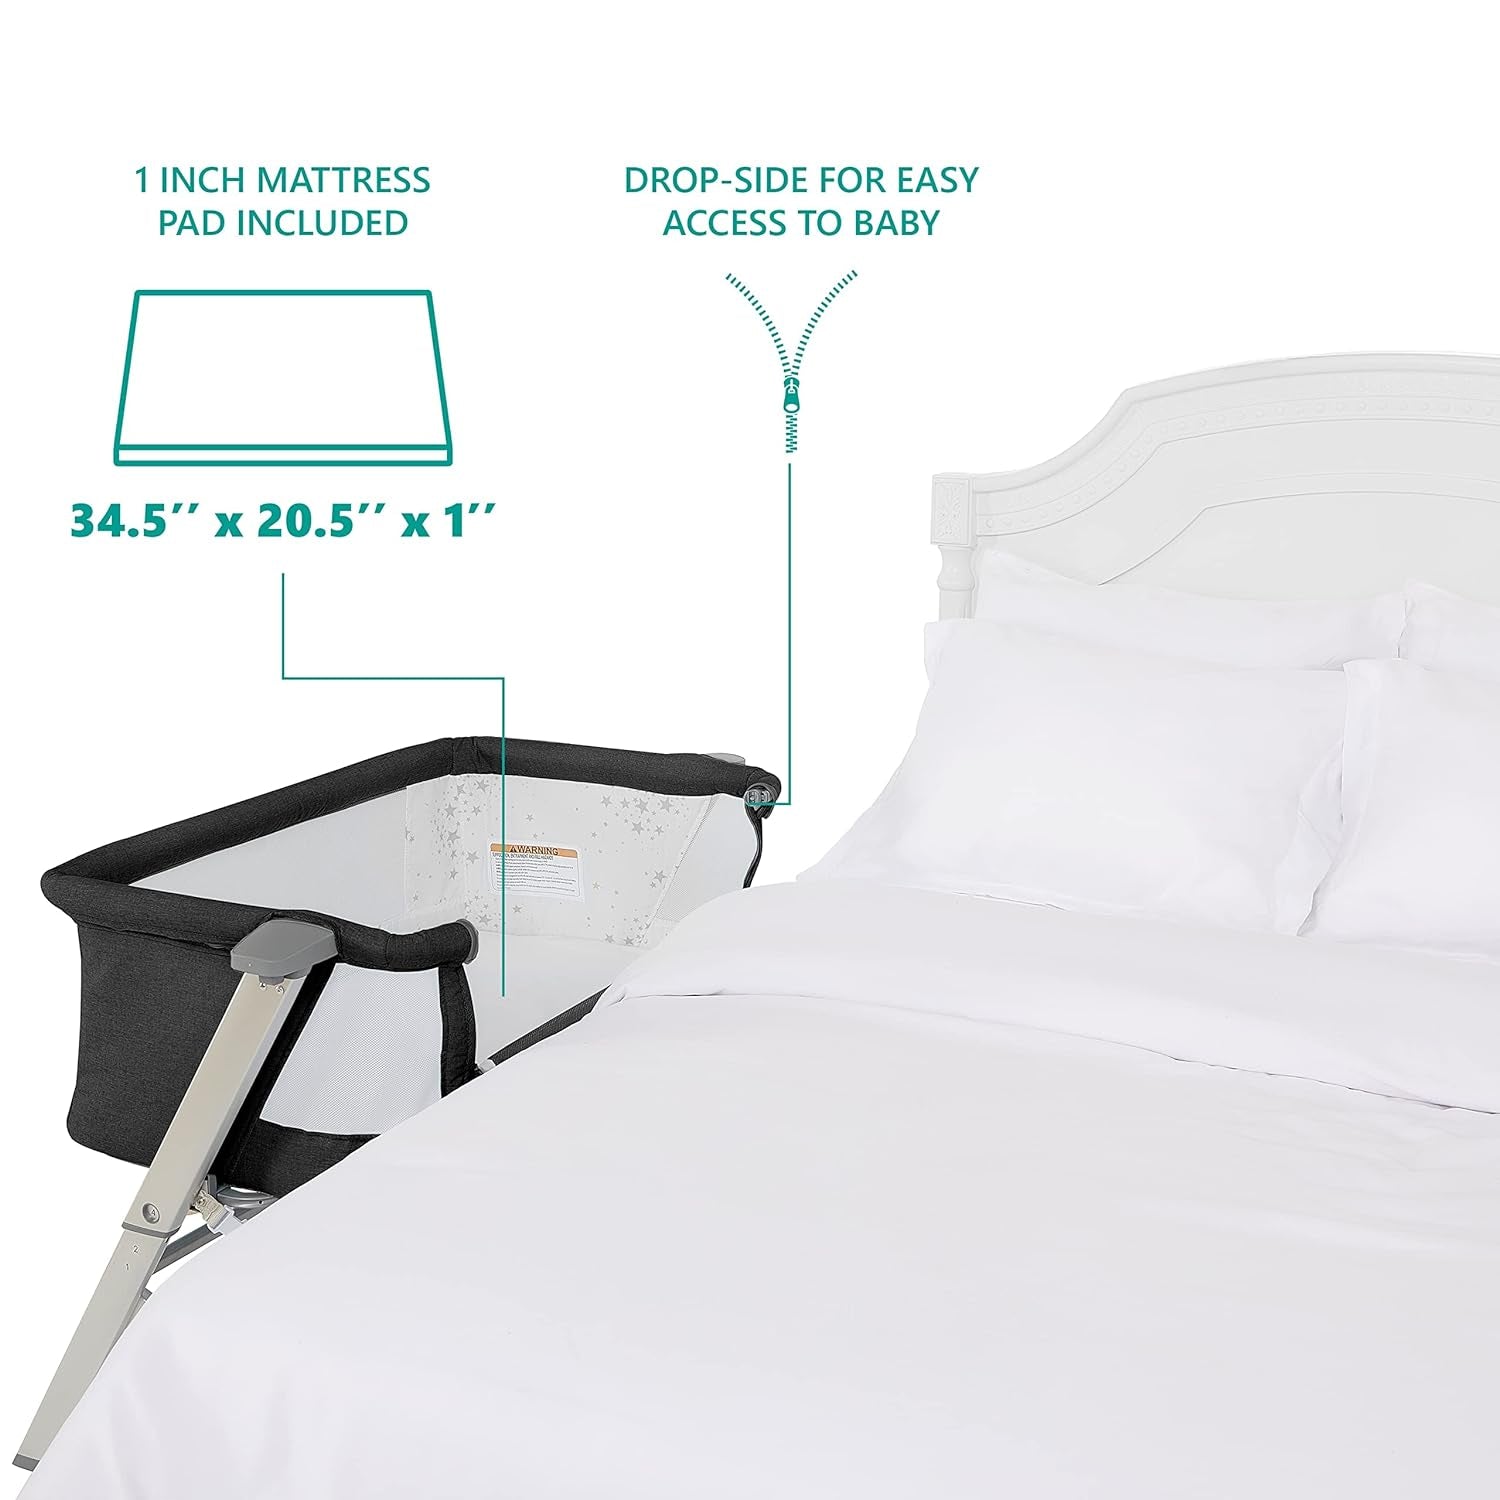 Skylar Bassinet and beside Sleeper in Black, Lightweight and Portable Baby Bassinet, Five Position Adjustable Height, Easy to Fold and Carry Travel Bassinet, JPMA Certified - Design By Technique